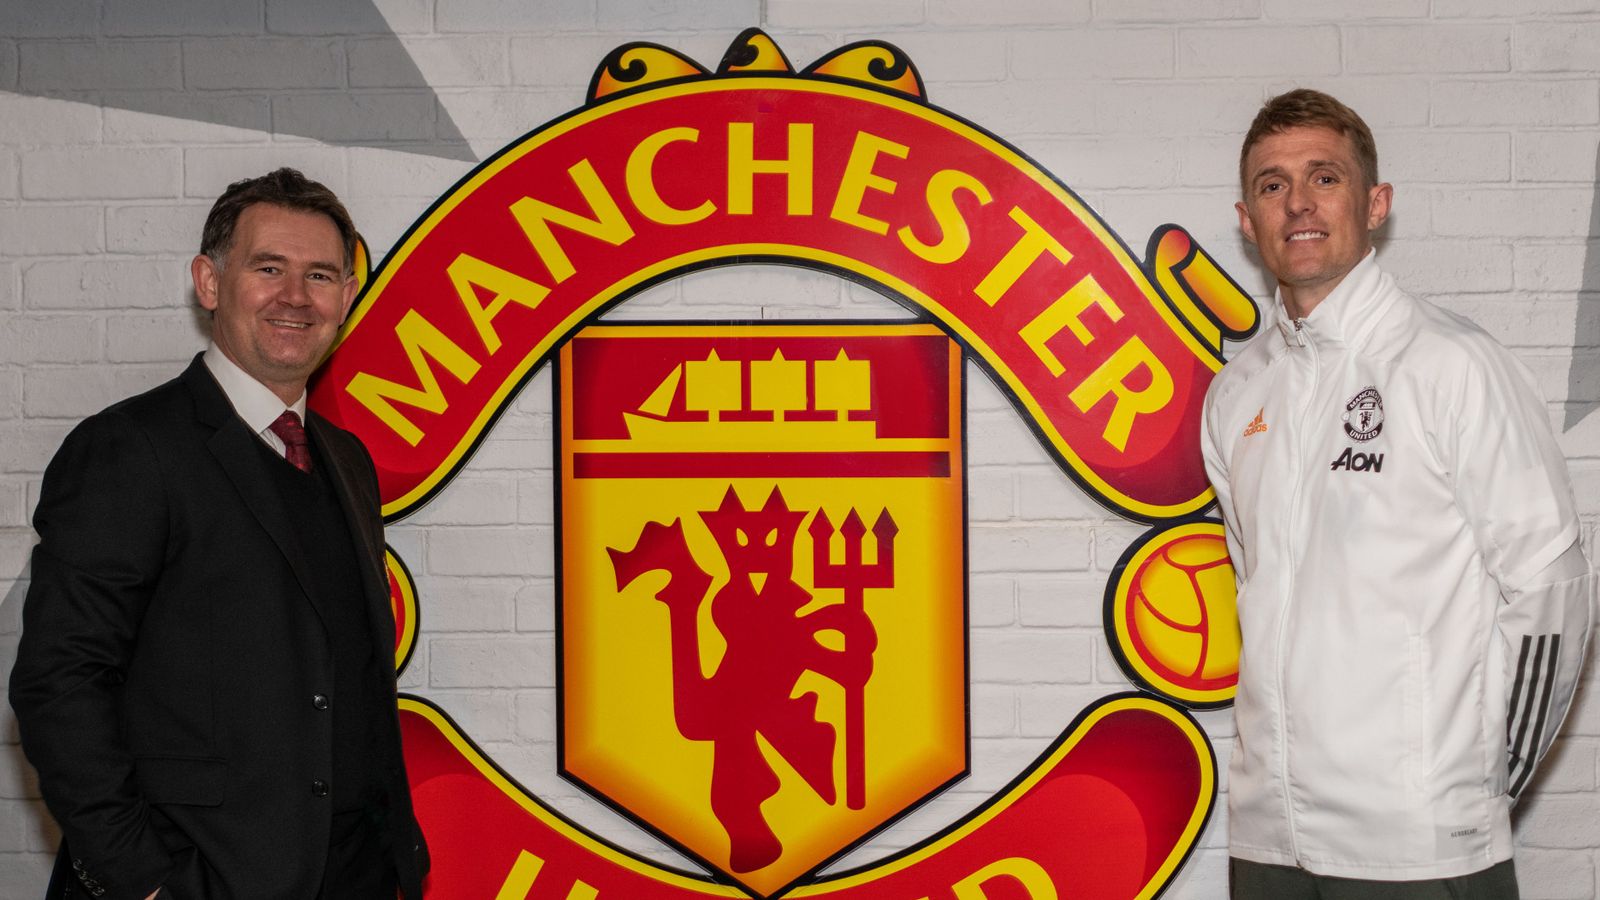 Manchester United conducting 'thorough process' to find next permanent manager, ..